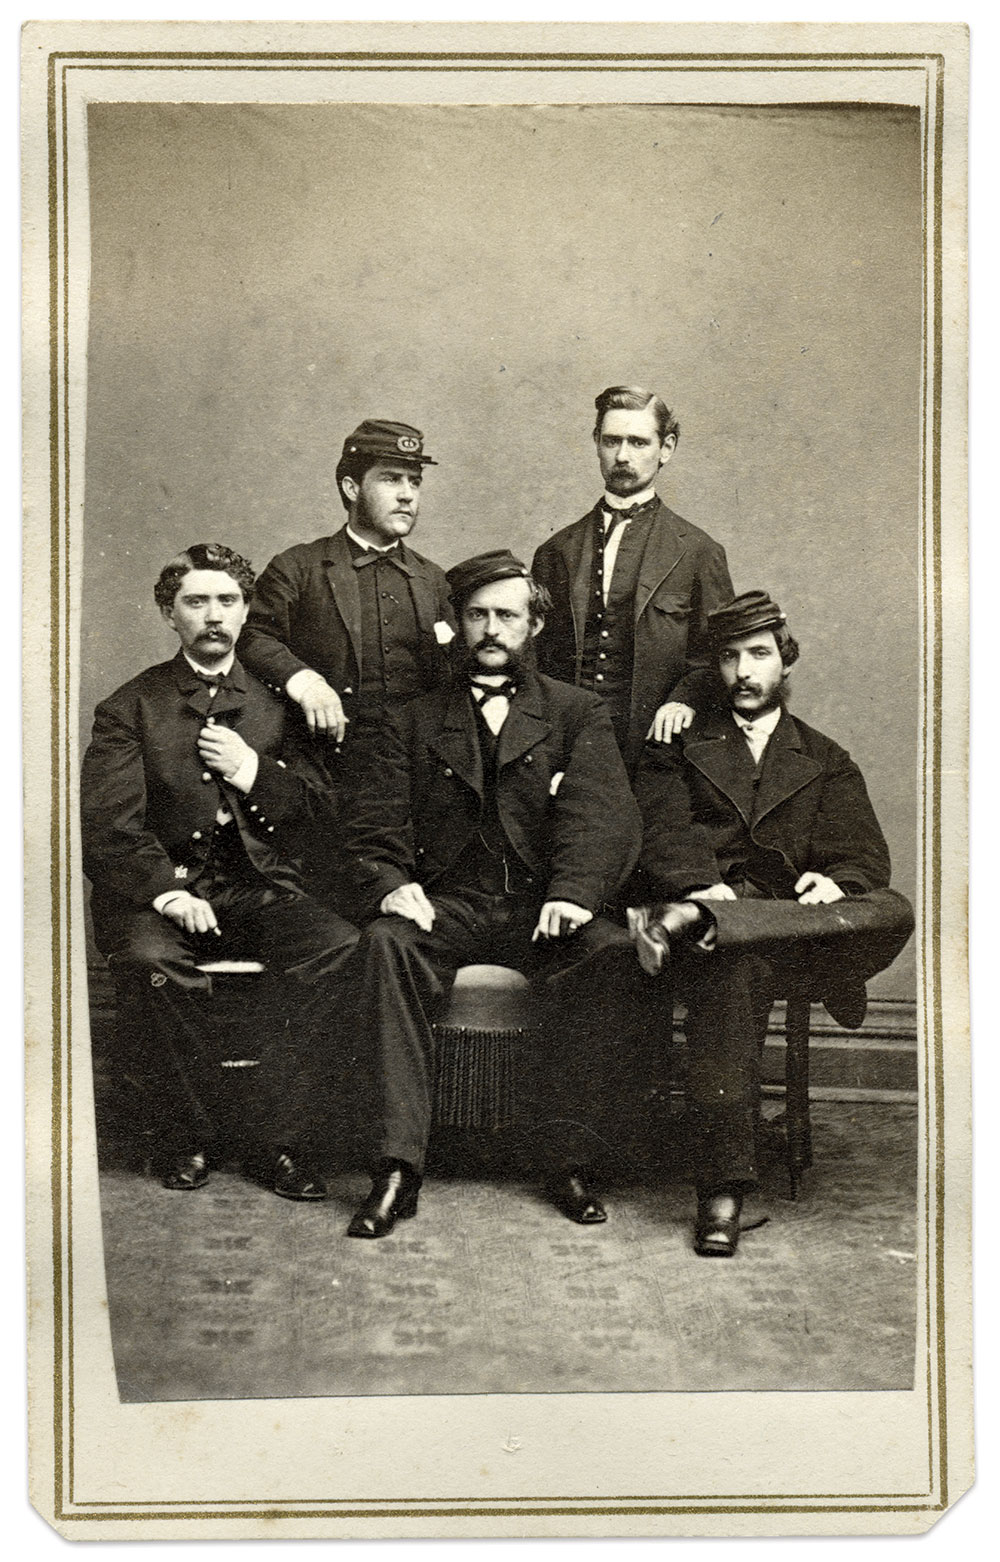 Kellogg sits on the far right with brother officers. From left: Capt. George Howard served in the 15th Pennsylvania Cavalry and Thomas’ staff, Capt. Benjamin Roberts of the 7th Iowa Cavalry served on the staff of Brig. Gen. Benjamin Stone Roberts, Quartermaster Department Capt. Andrew W. Wills, and Capt. Charles M. Keyser of the15th Pennsylvania Cavalry and 15th U.S. Colored Infantry. Carte de visite by Algenon Morse of Nashville, Tenn. Ronald S. Coddington Collection.